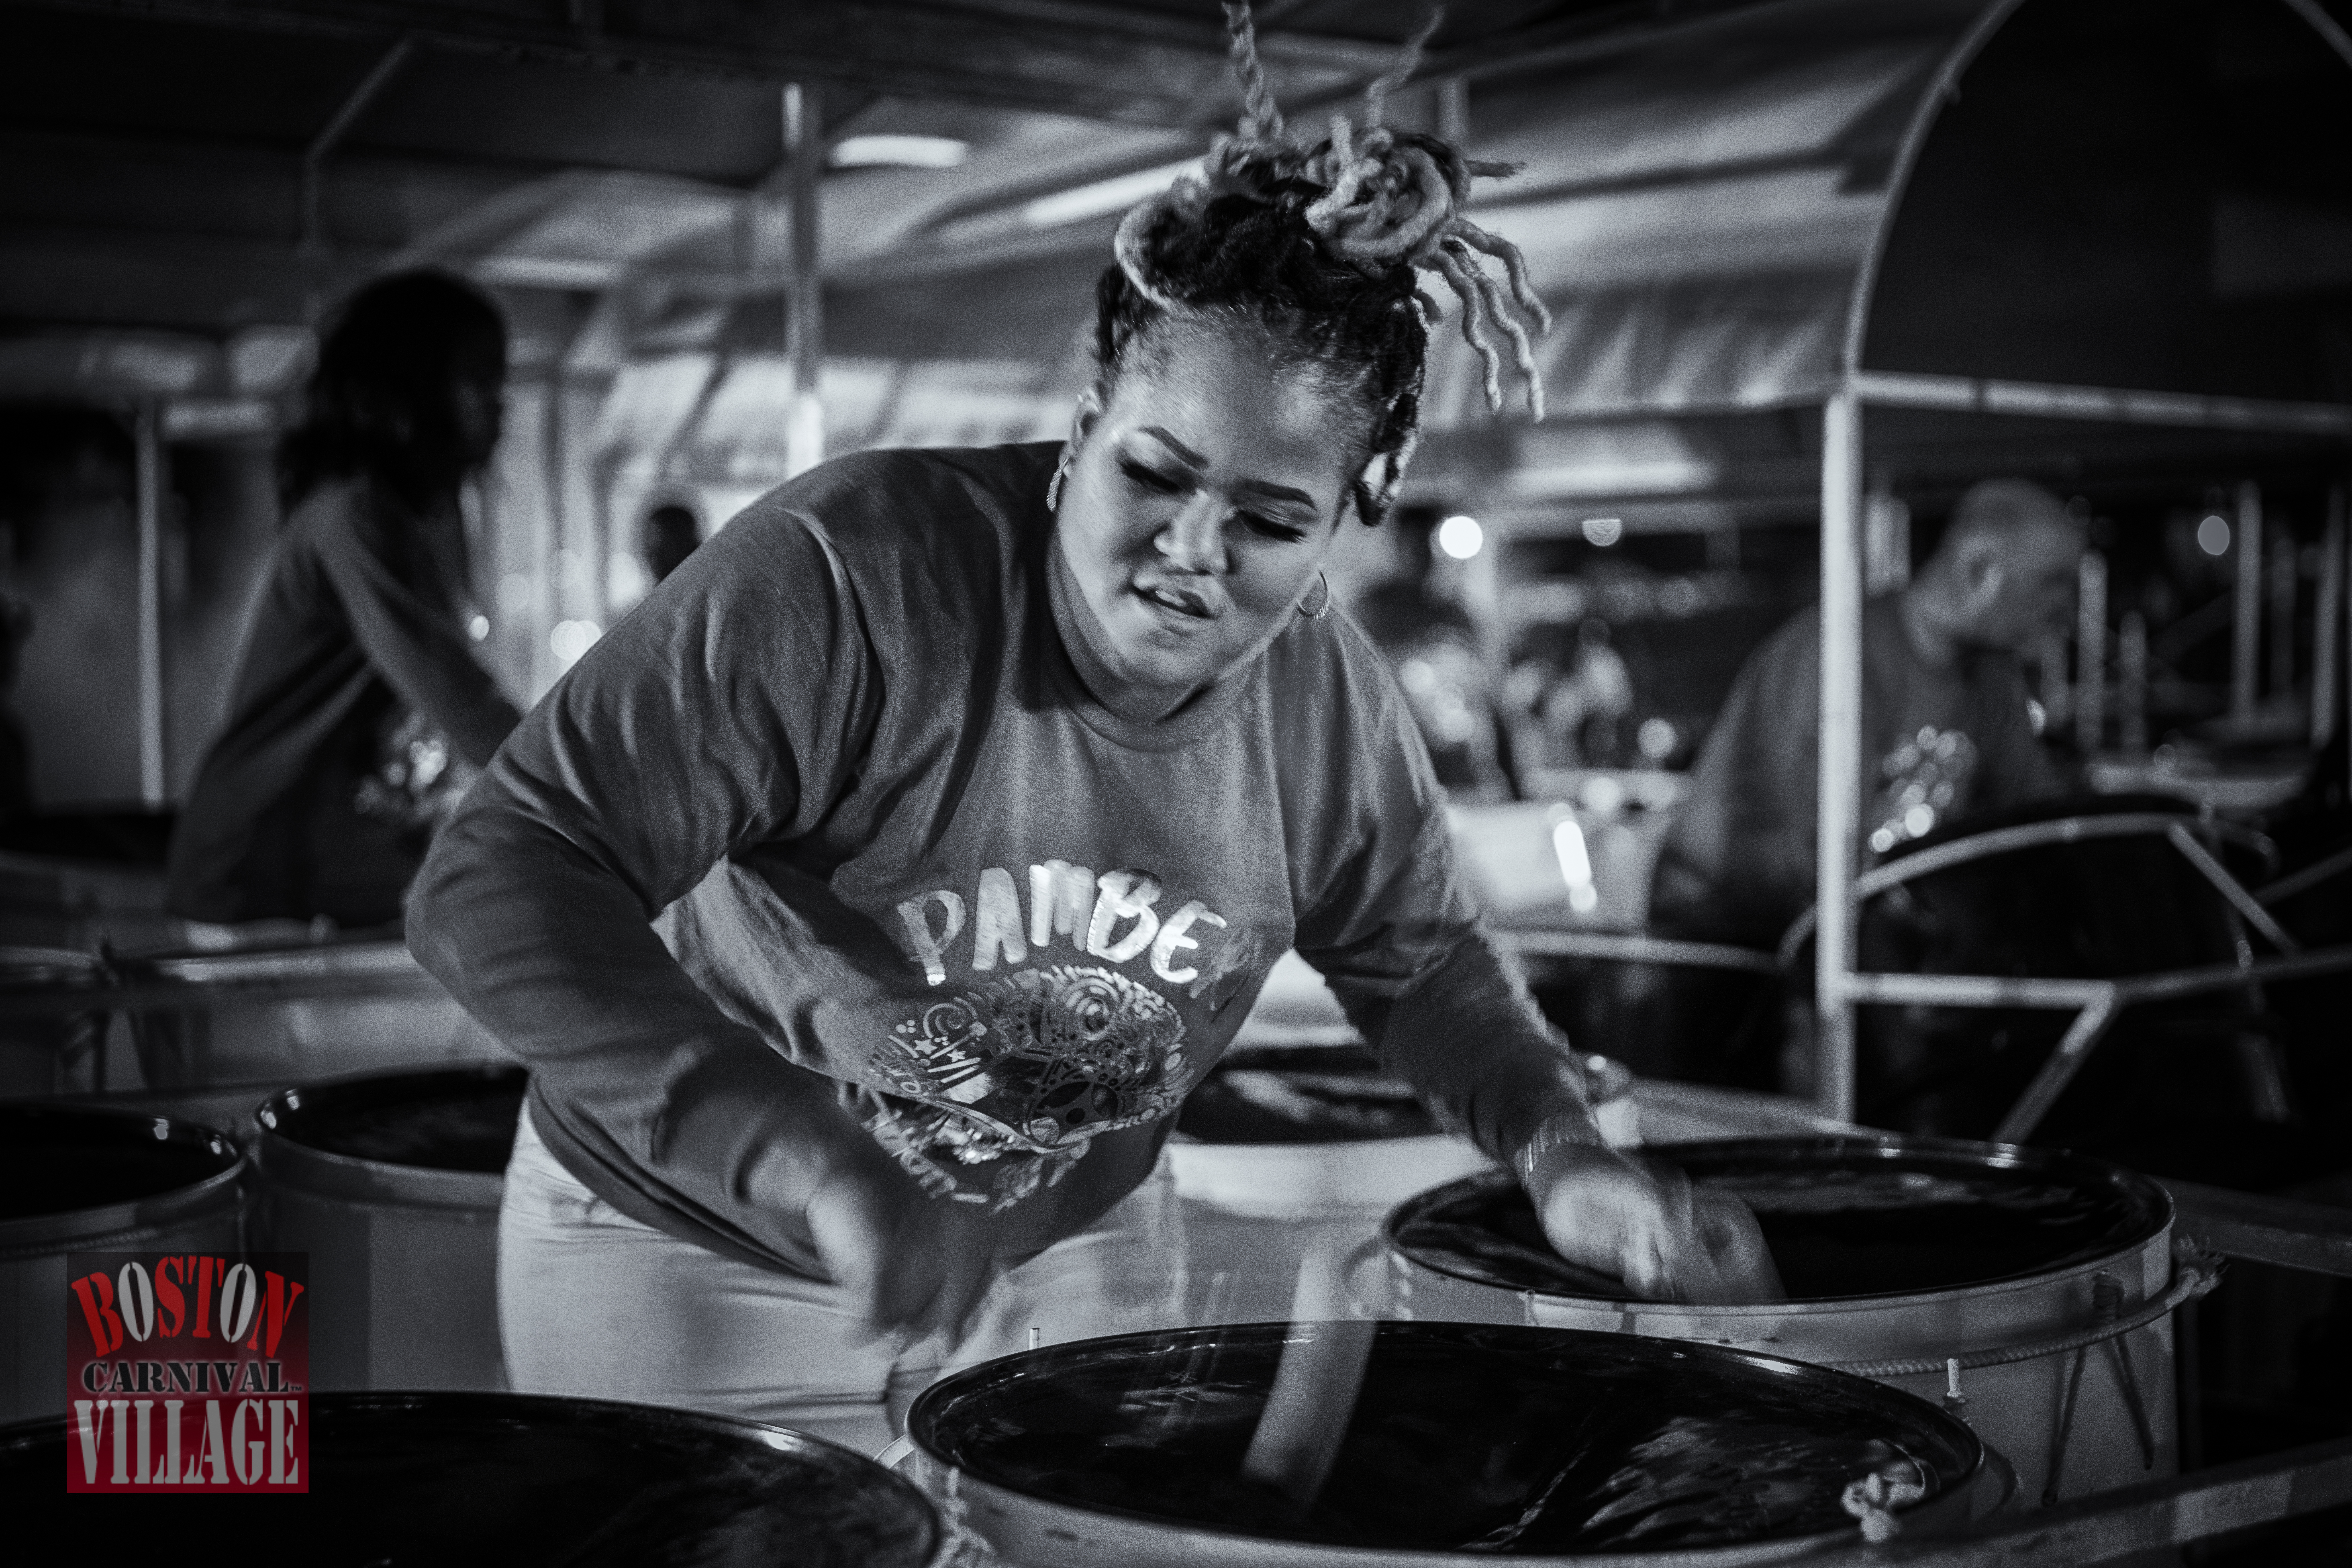 Tobago Steelpan event 2020 photography by Michael C. Smith